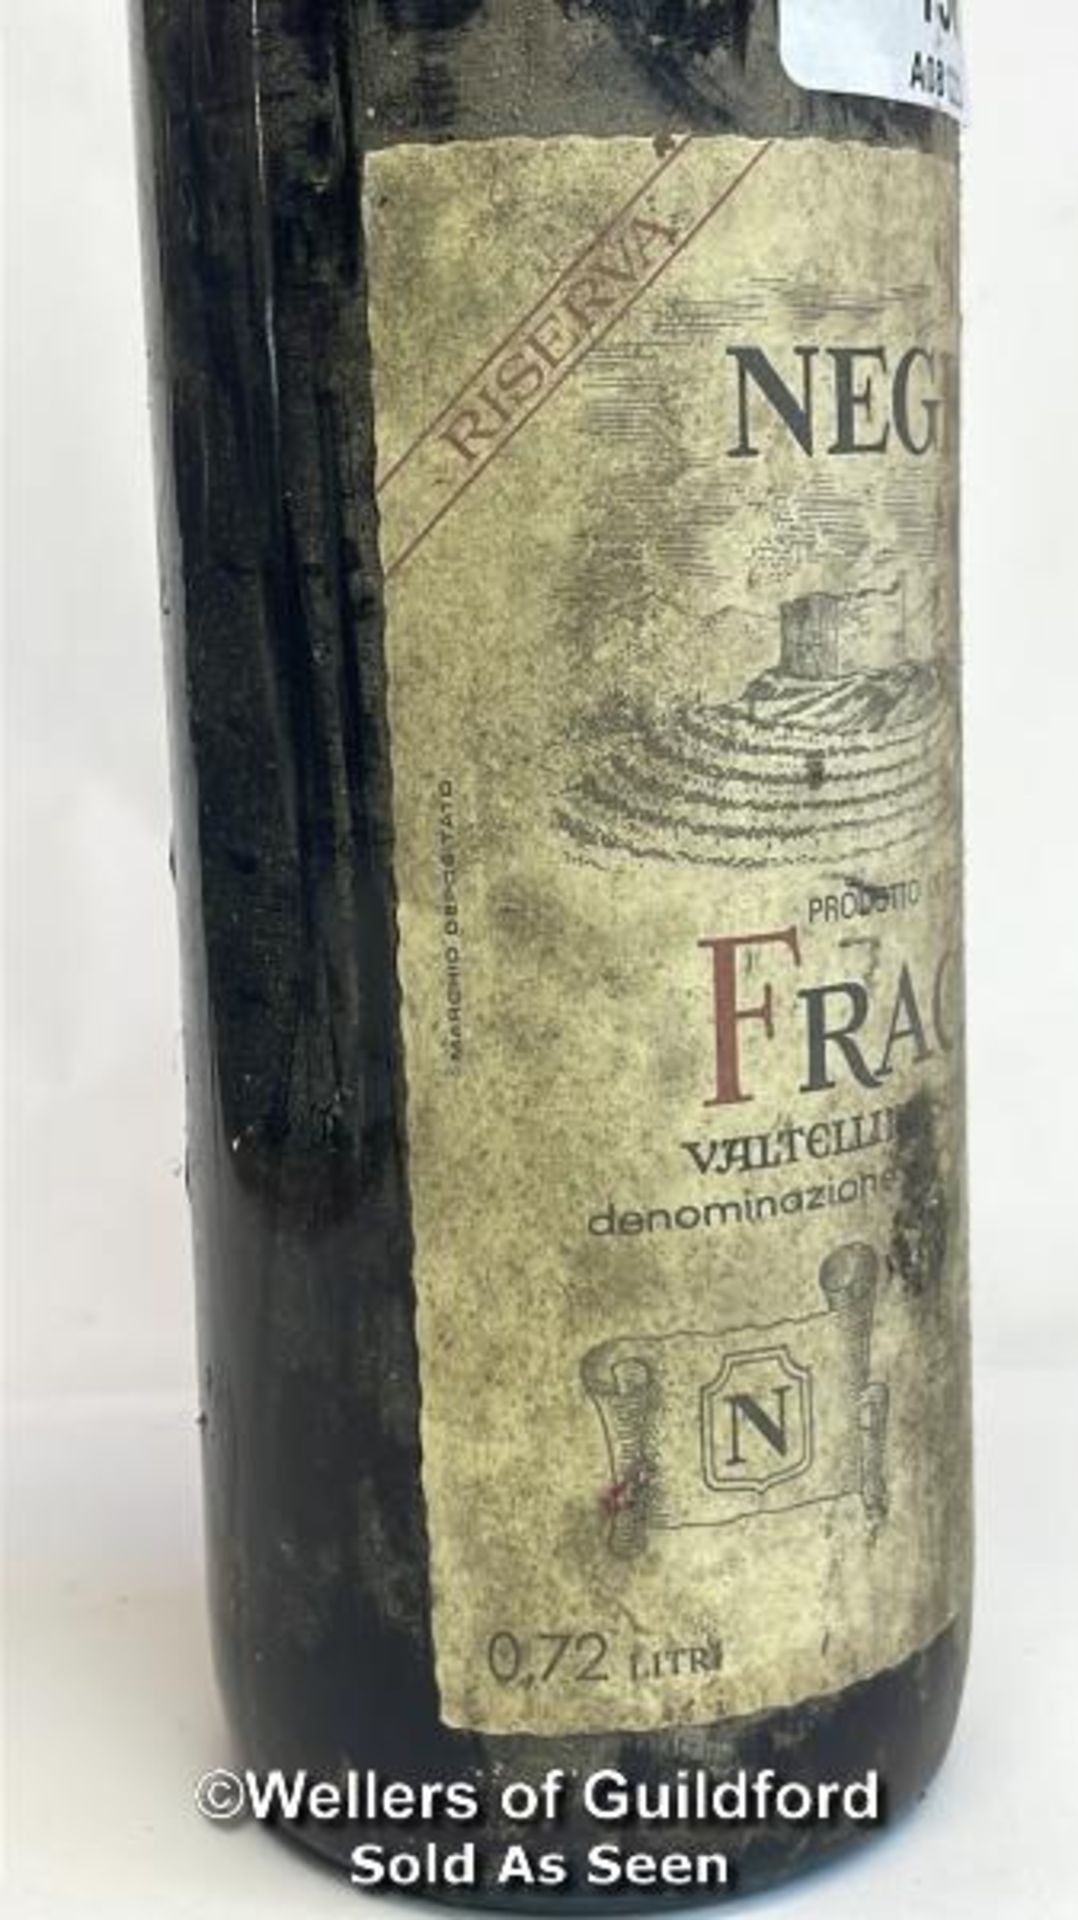 1971 Negri Fracia, 72cl, 12.5% vol / Please see images for fill level and general condition. - Image 4 of 7